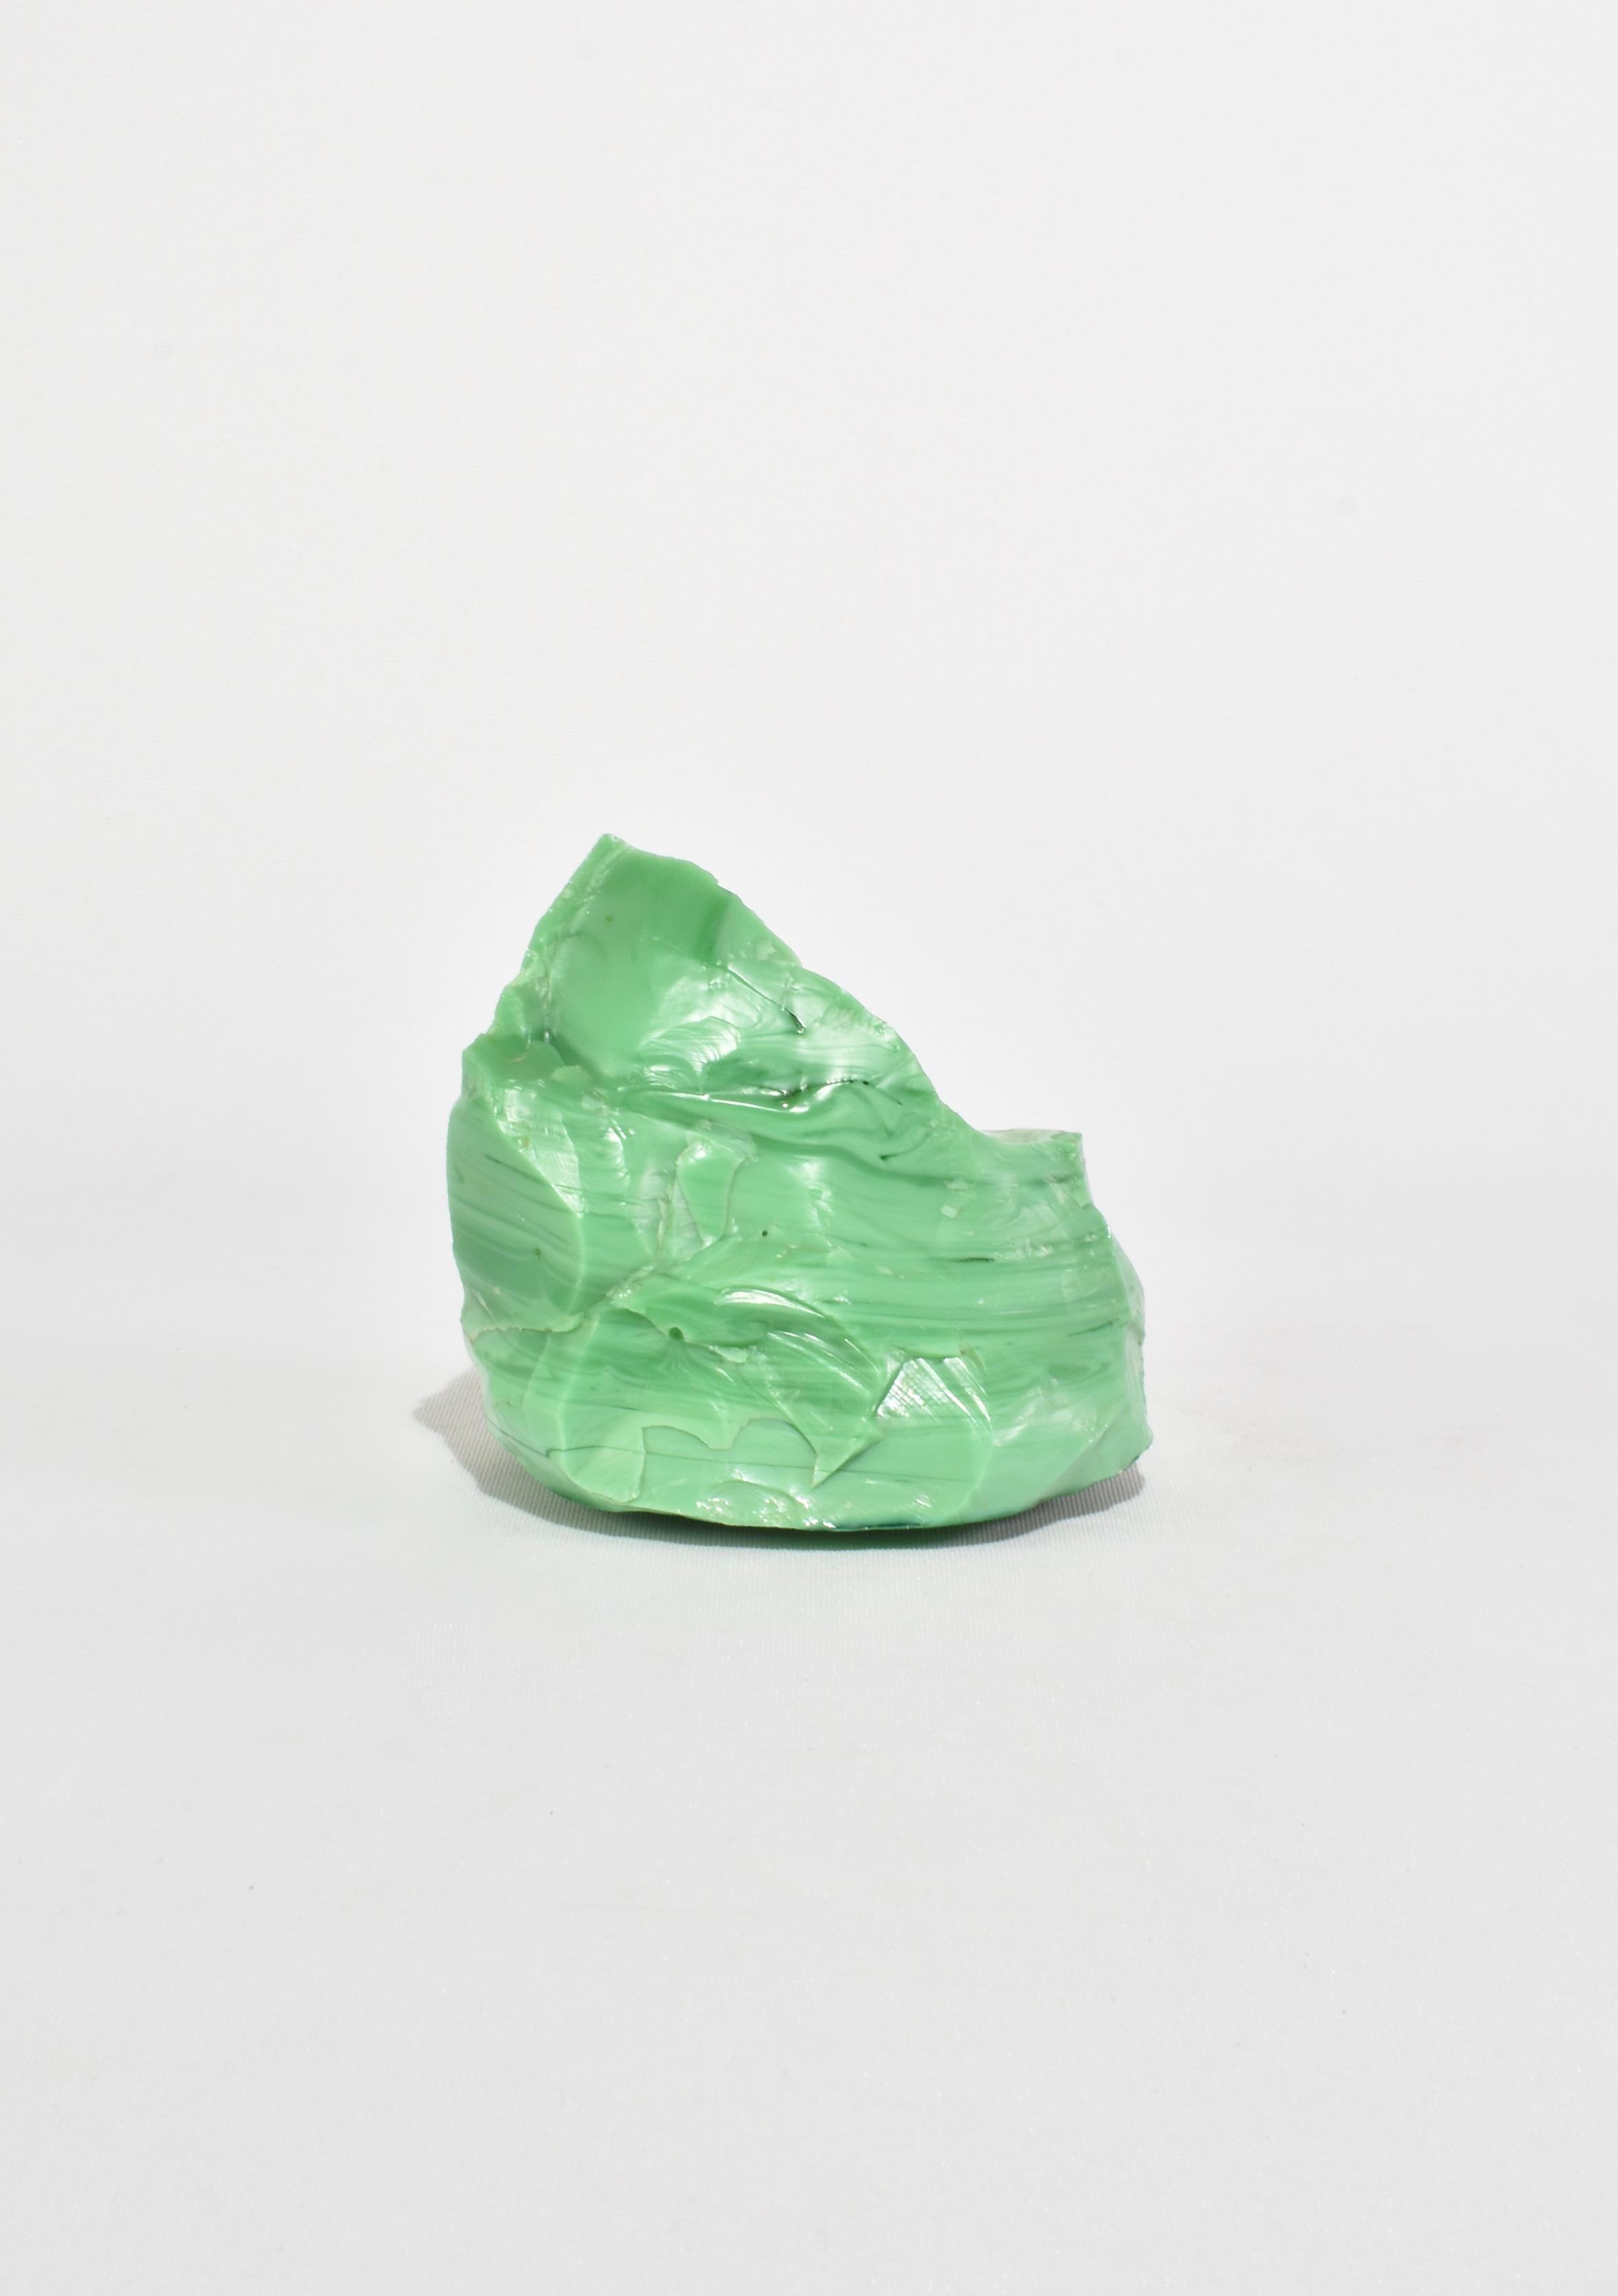 Hand-Crafted Green Glass Sculpture